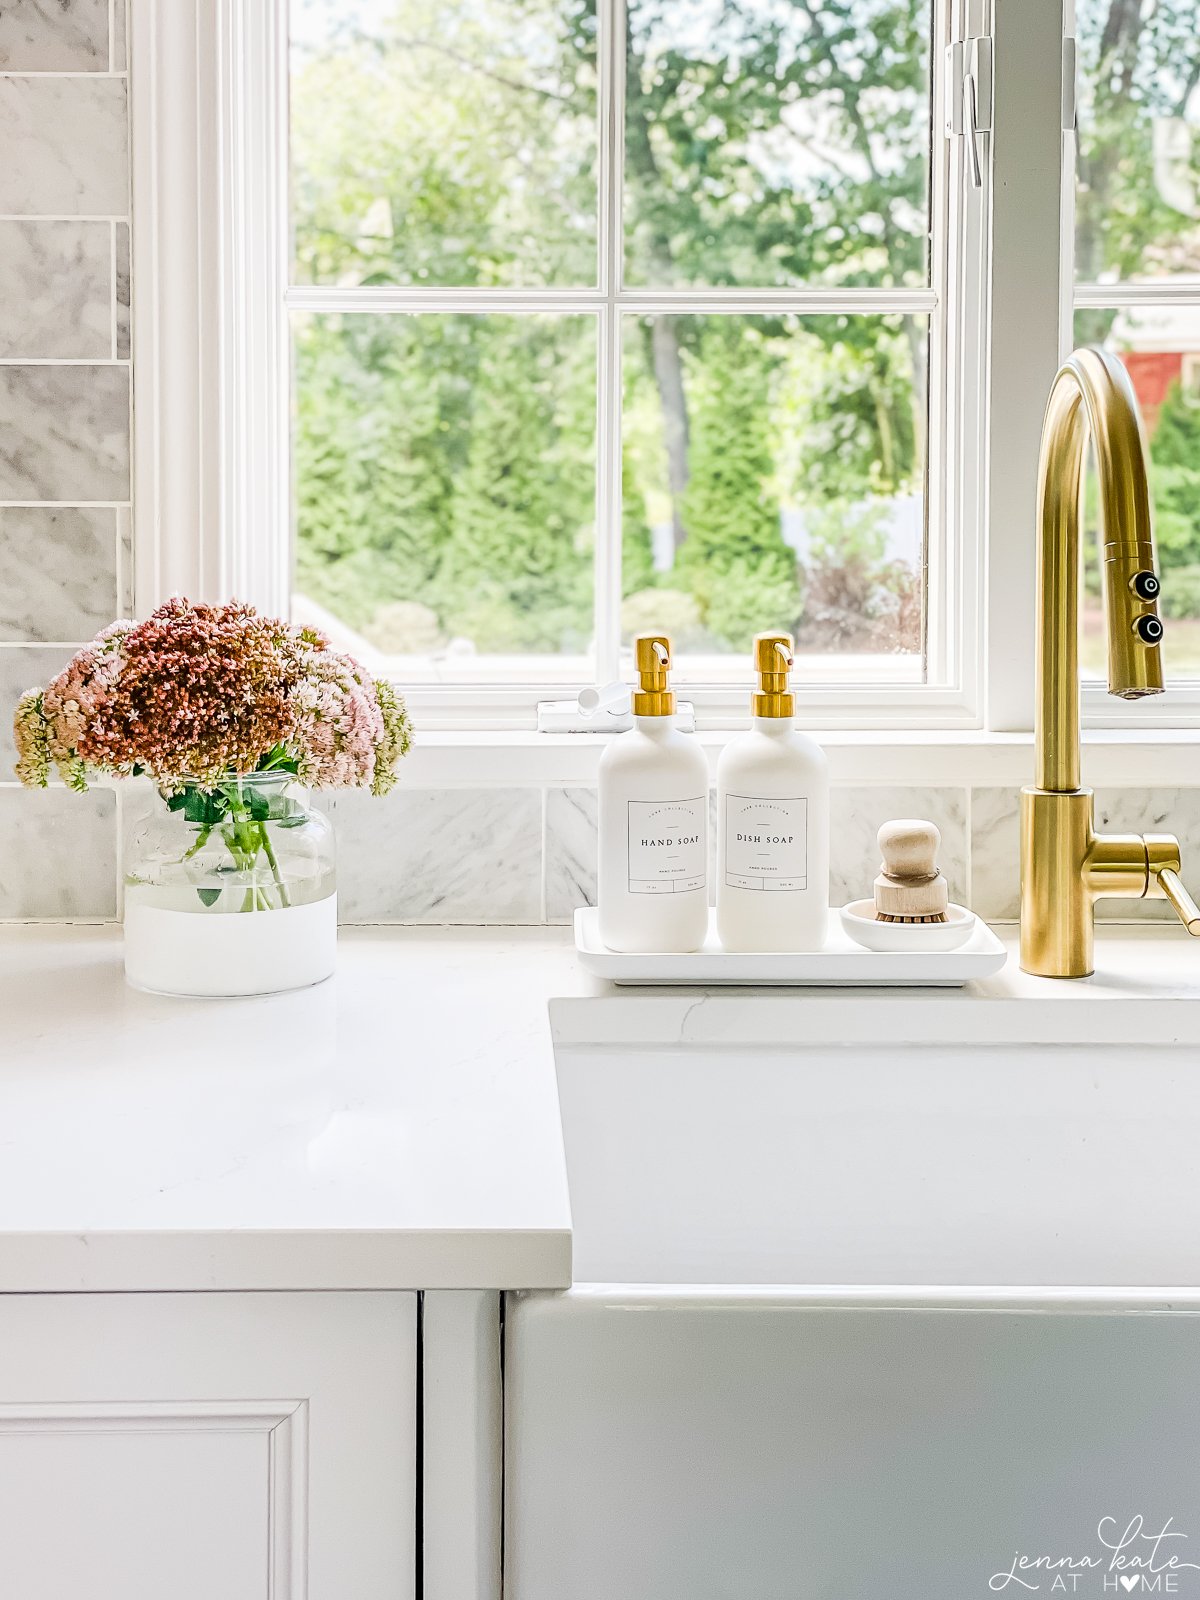 small vase filled with sedum next to a sink with a brass faucet